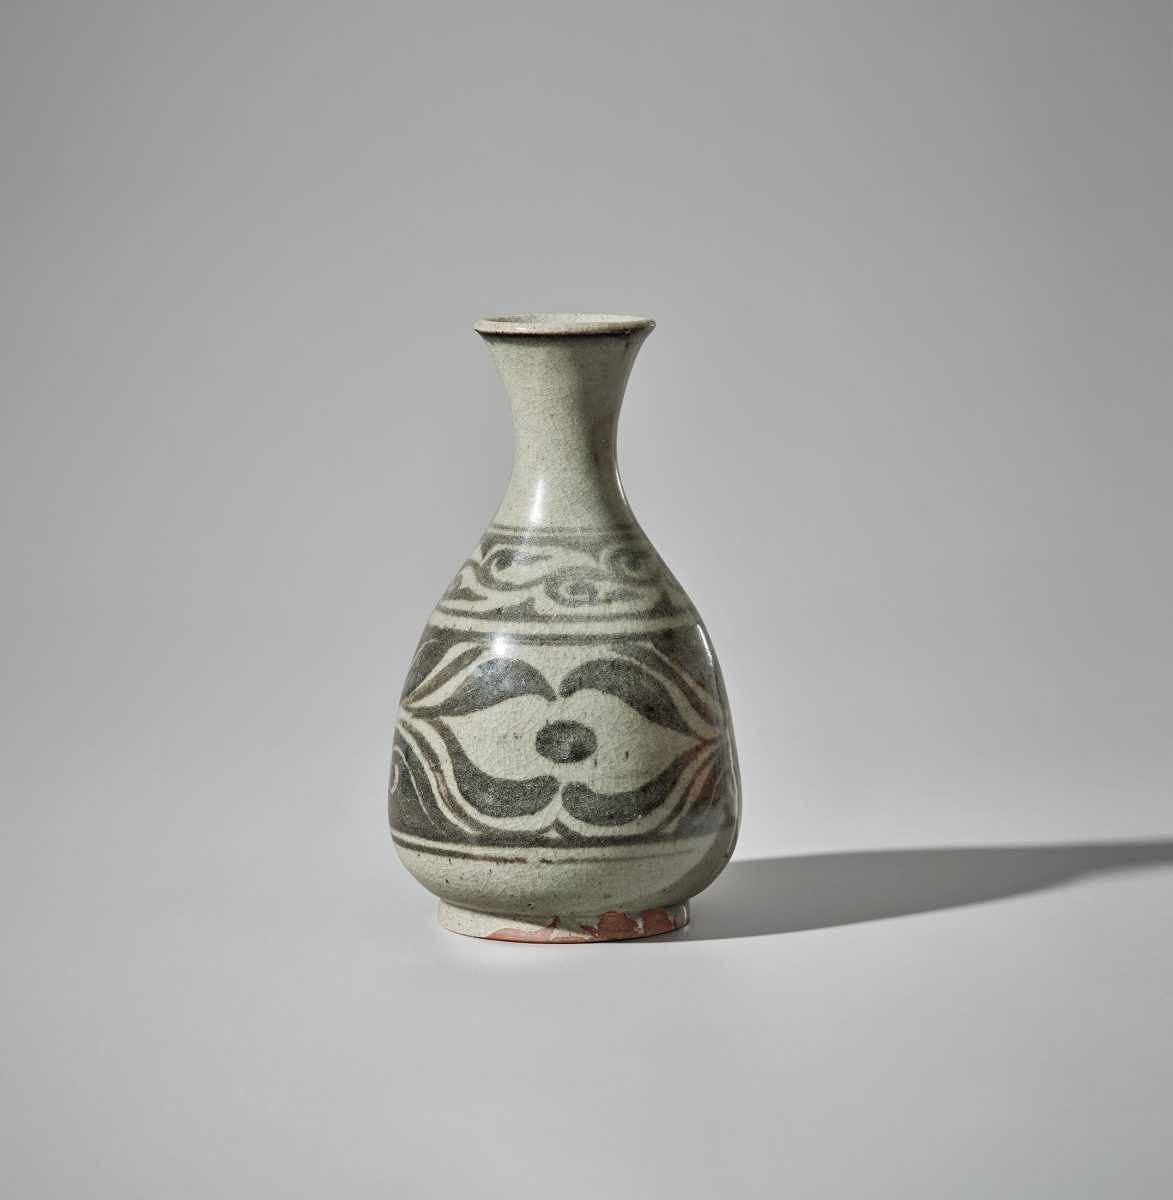 Bernard Leach, Rare early vase, 1923, Stoneware, dark celadon glaze with painted and incised design derived from Thai Sawankhalok wares